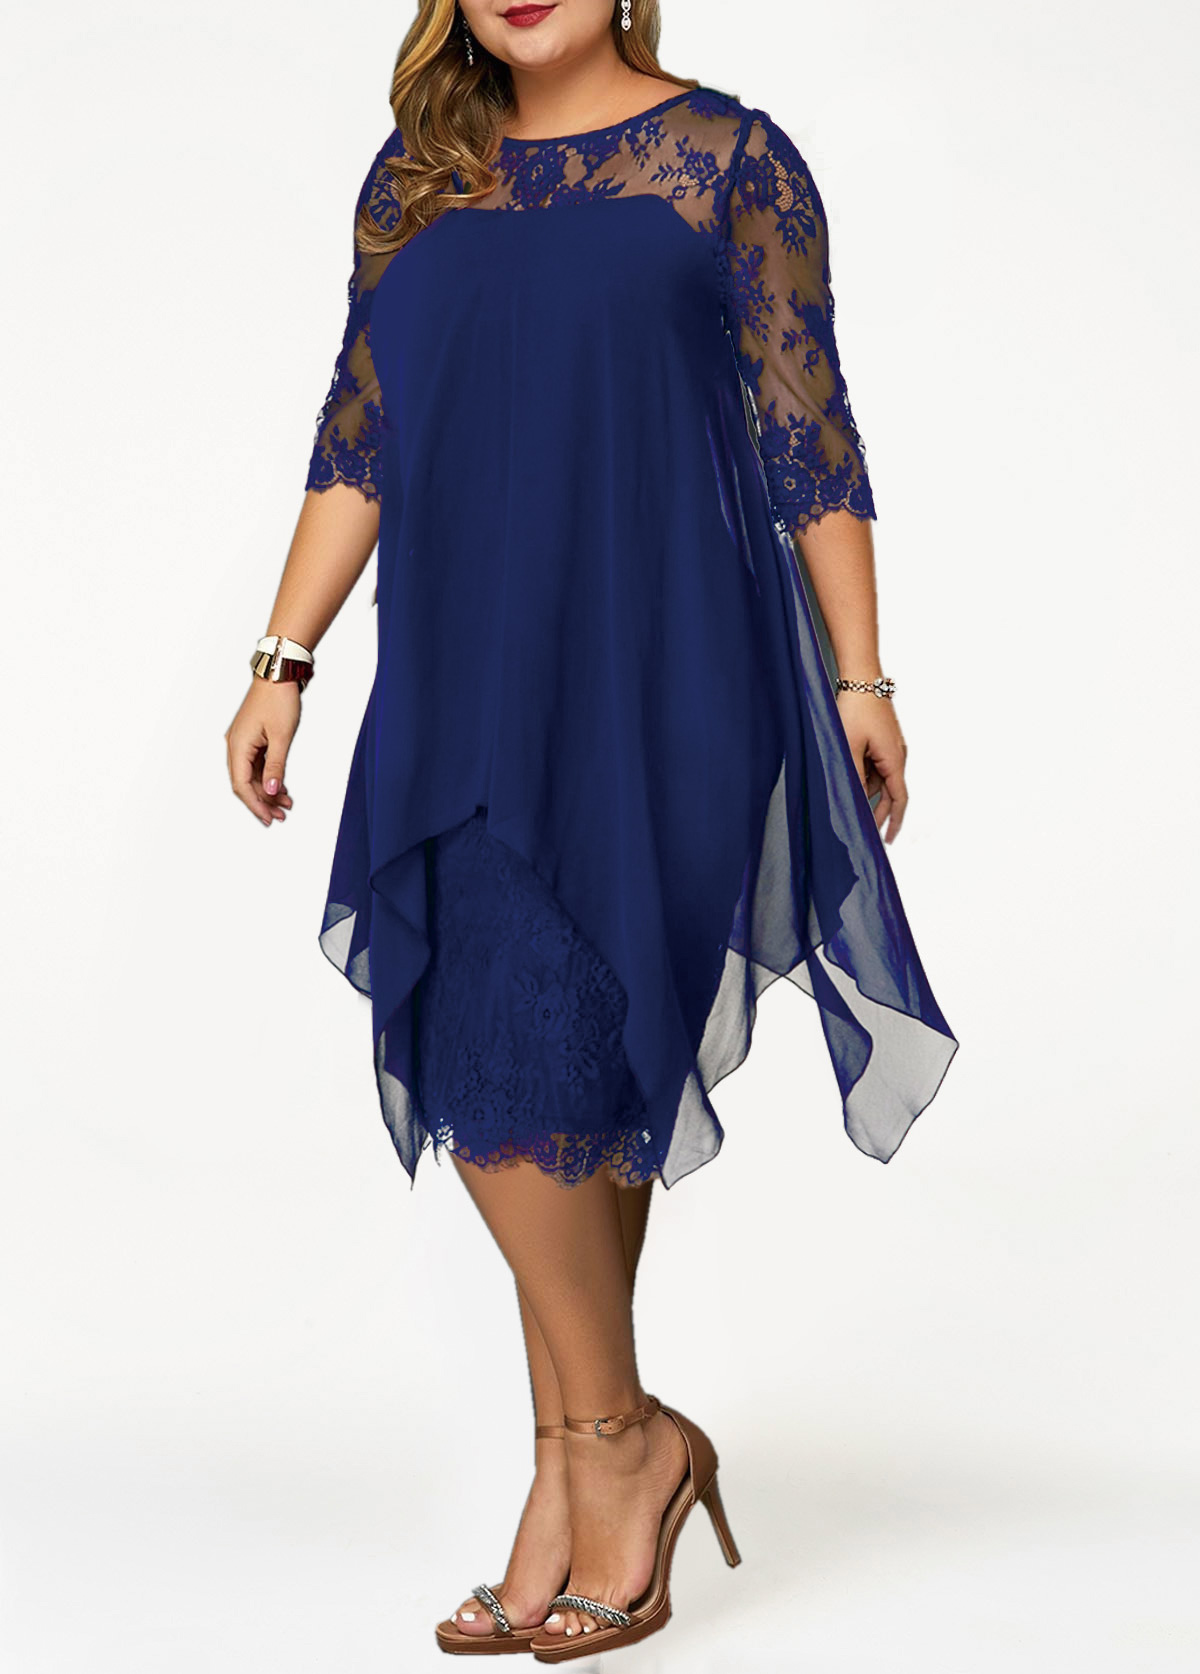 chiffon overlay lace dress | Shop The Best Discounts Online |  avsenggcollege.ac.in